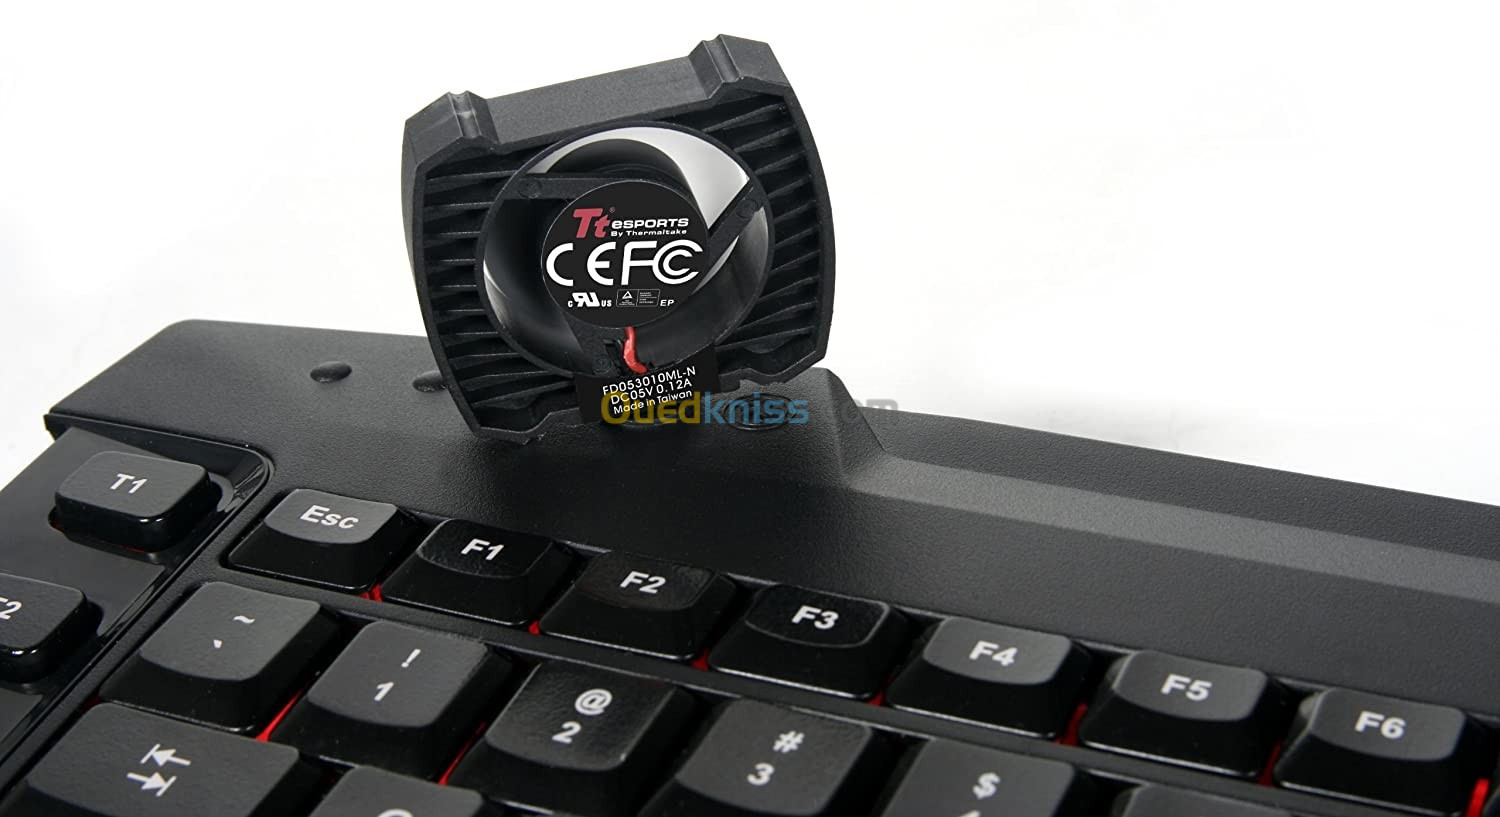 Clavier Gaming - Thermaltake eSPORTS 001 Challenger Pro USB 